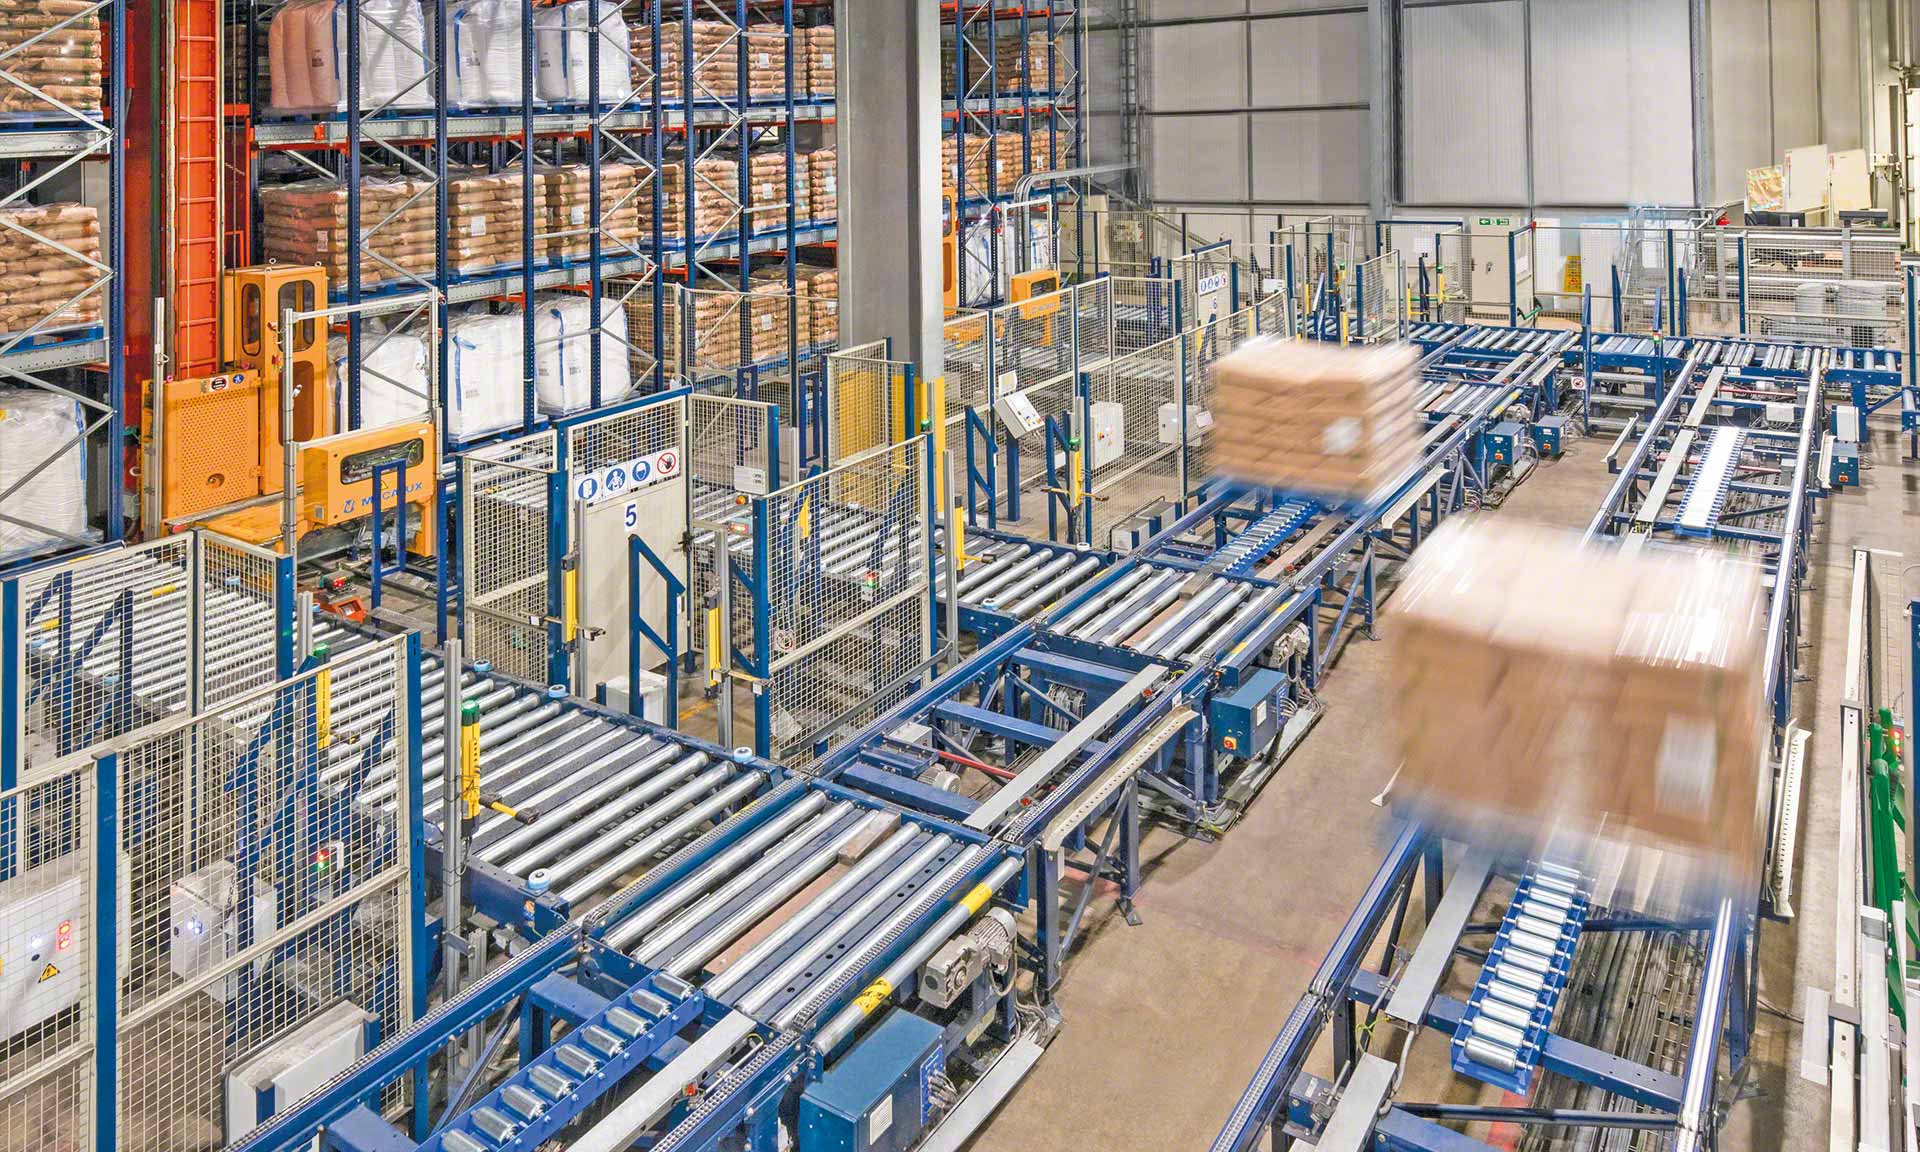 Logistics providers are investing in process automation to boost efficiency